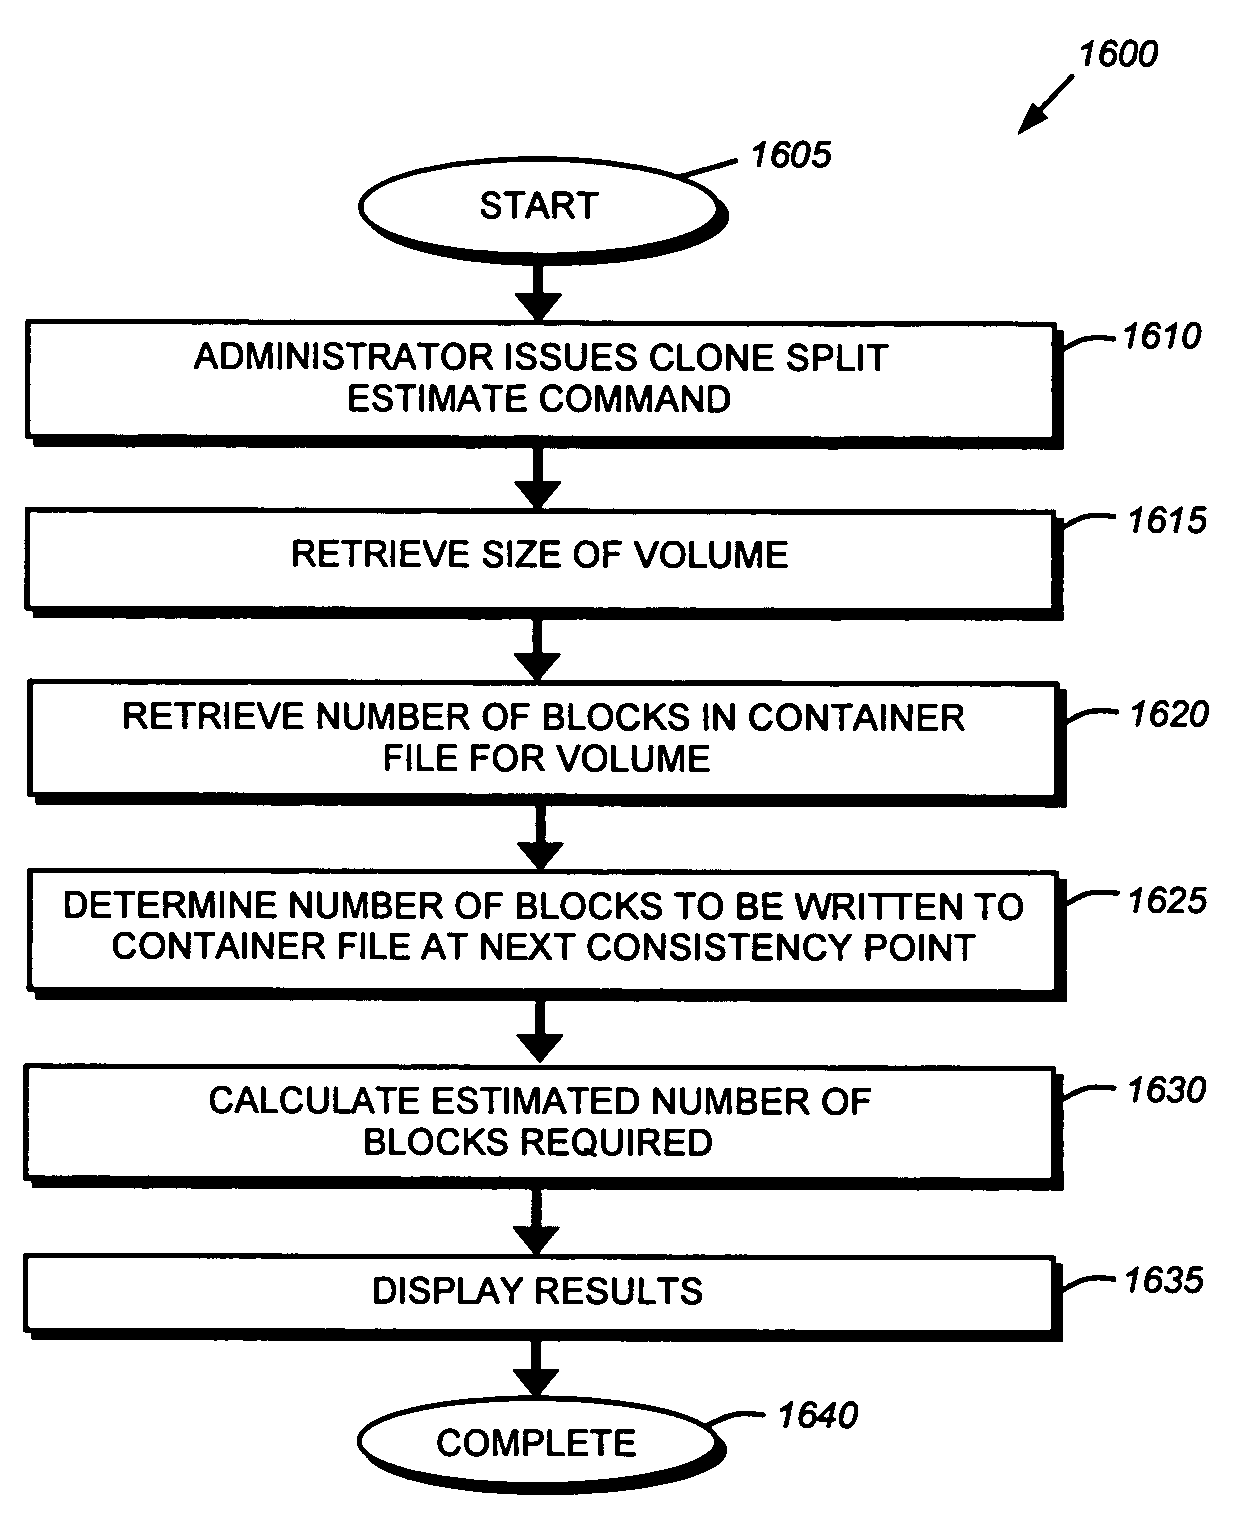 System and method for efficiently calculating storage required to split a clone volume